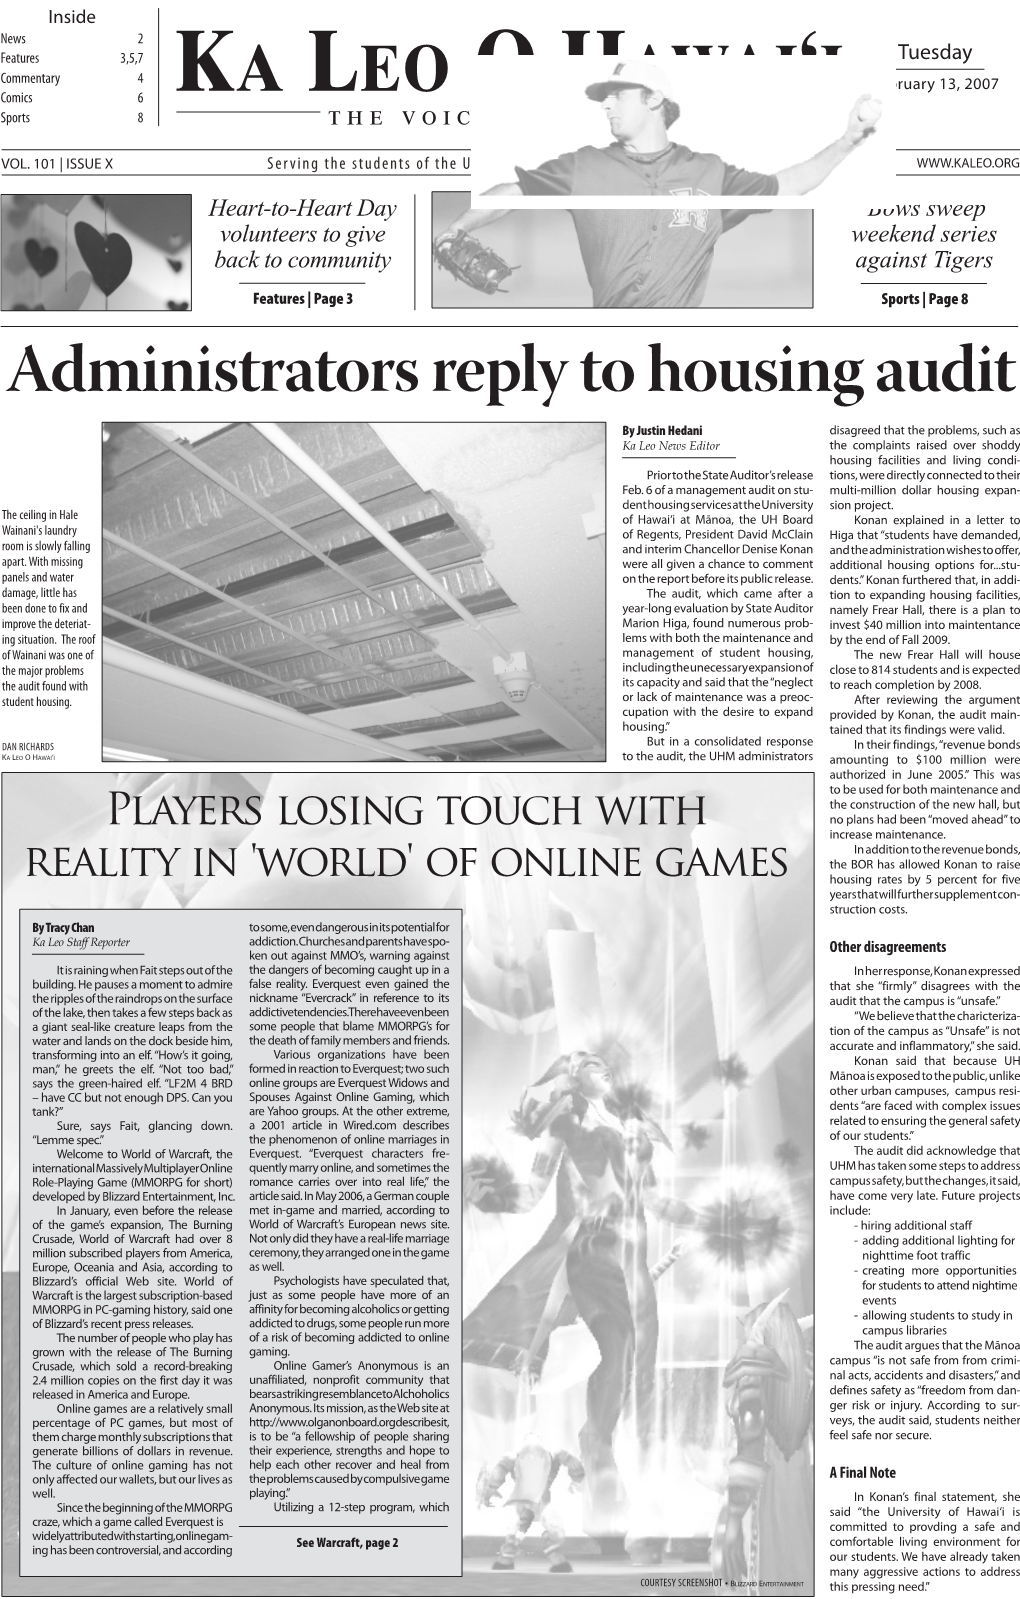 Administrators Reply to Housing Audit